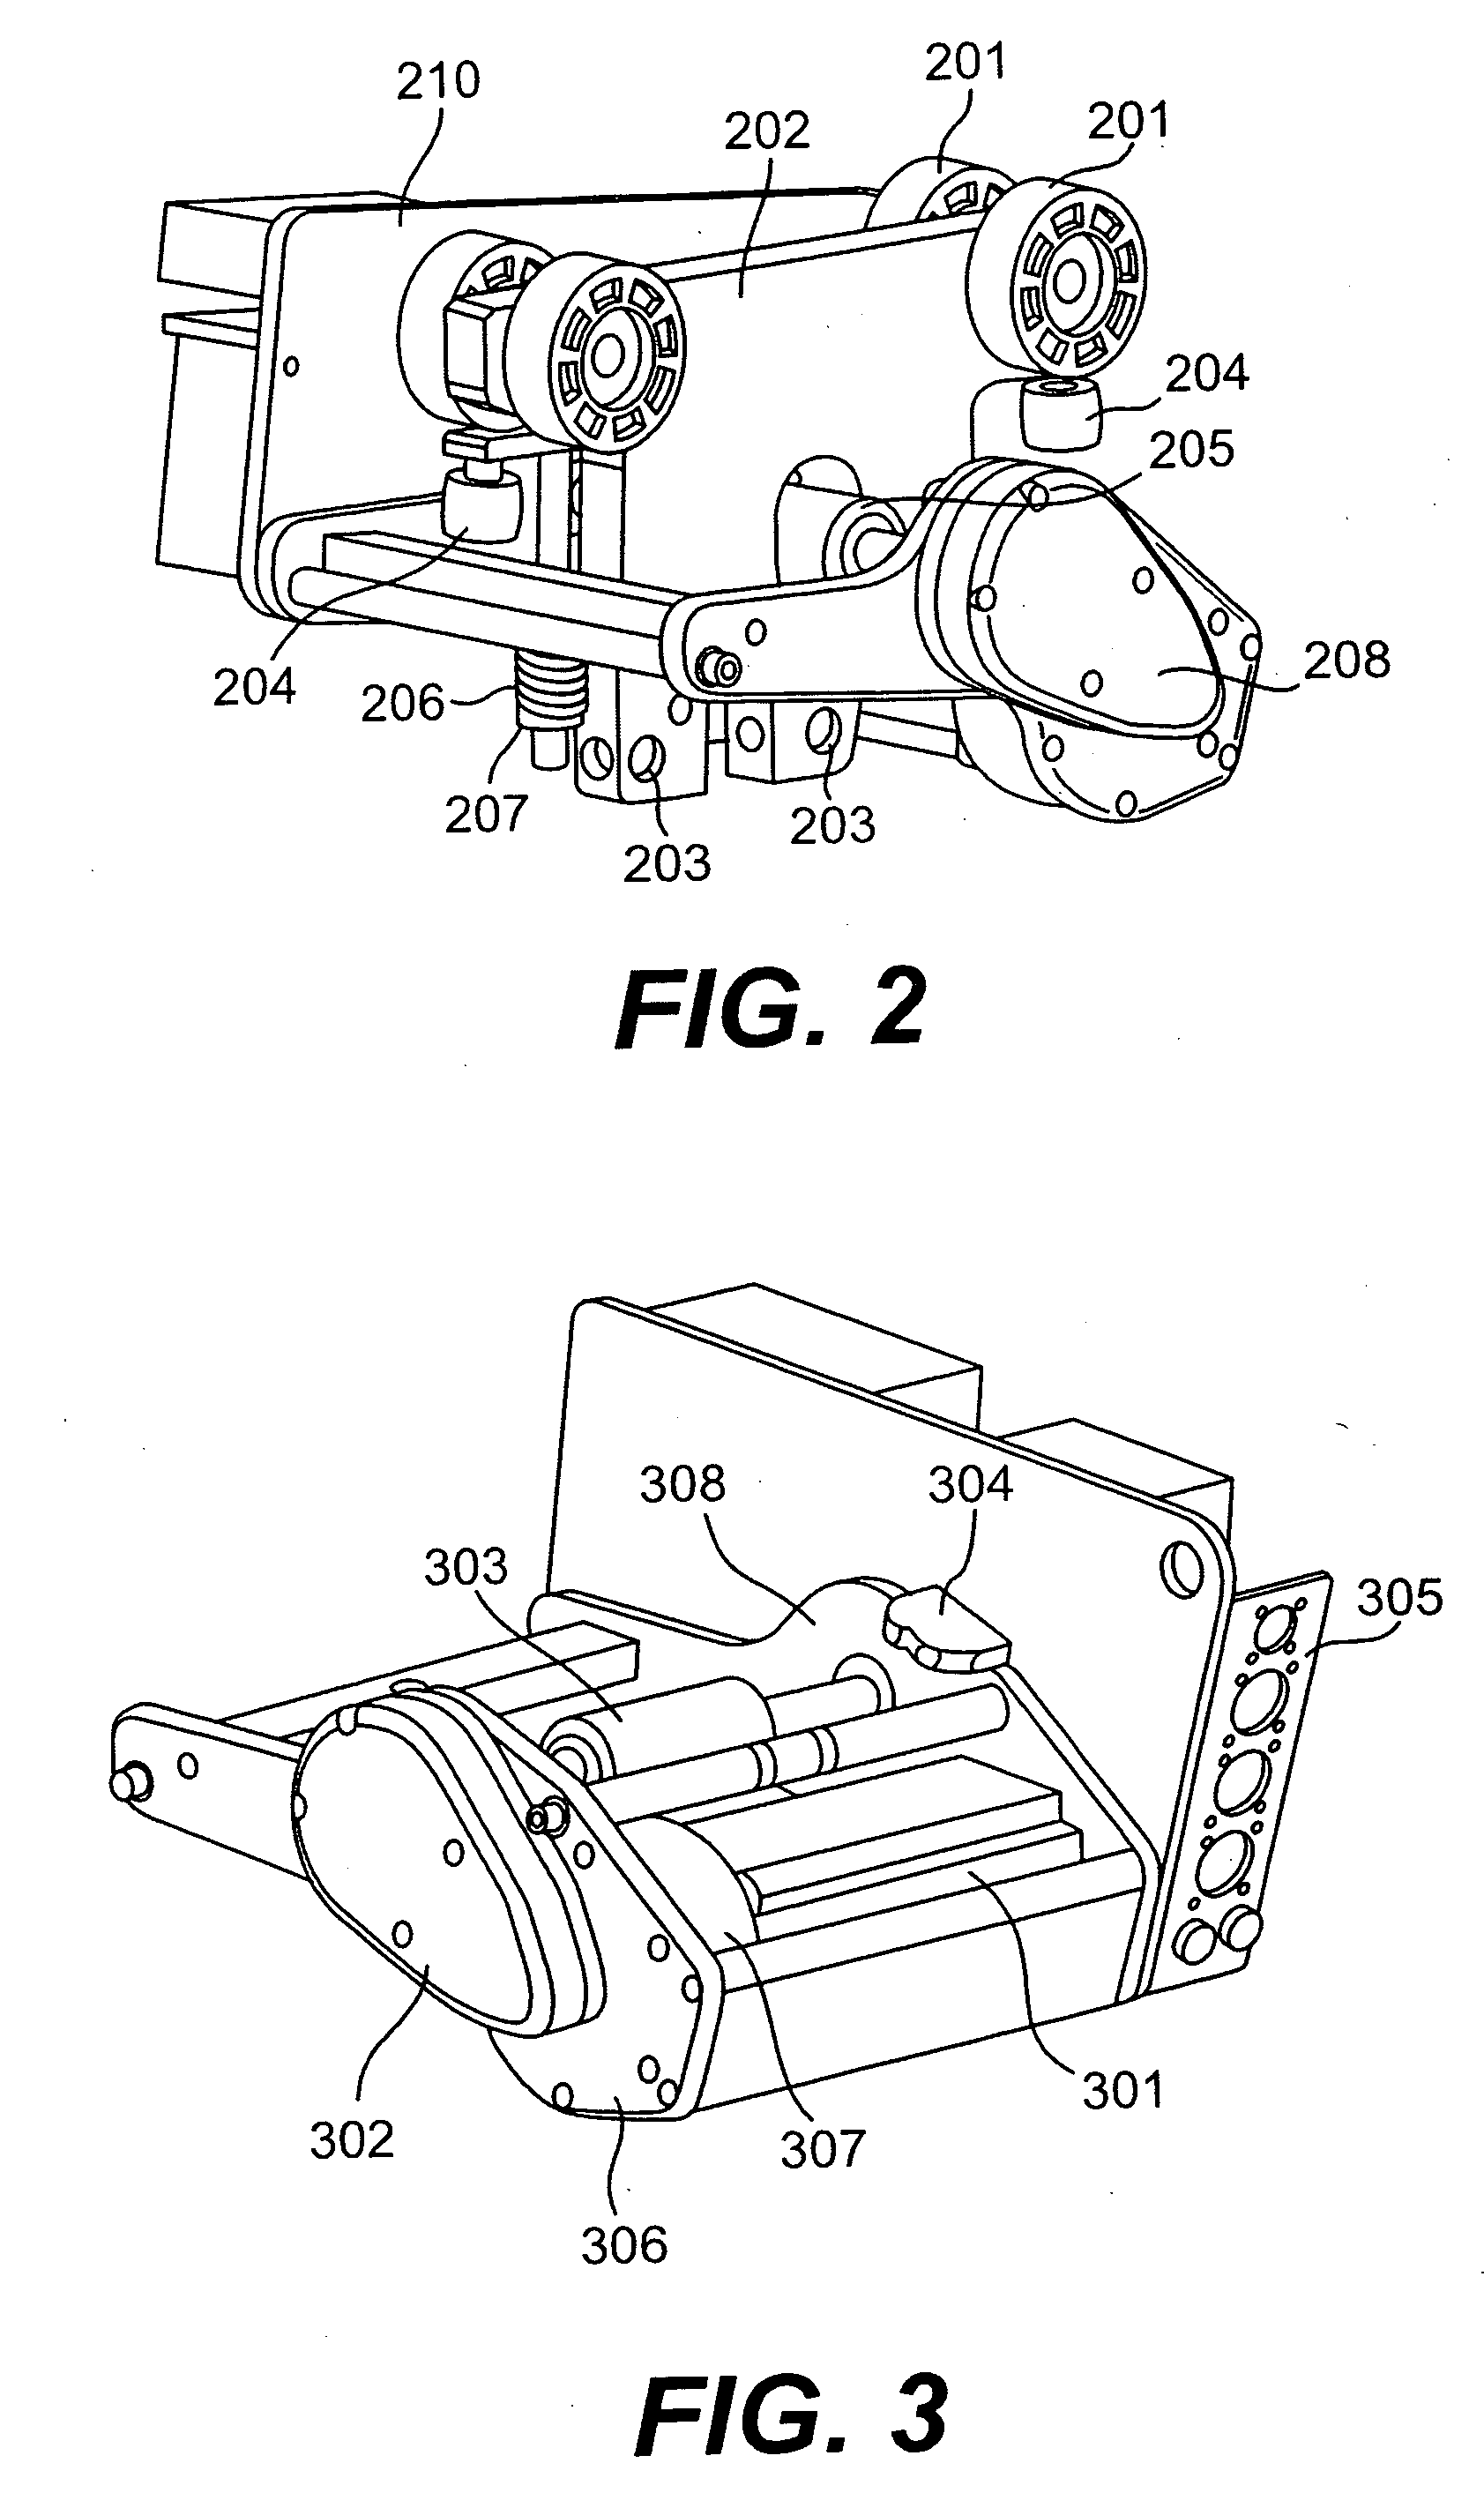 System and architecture for providing a modular intelligent assist system